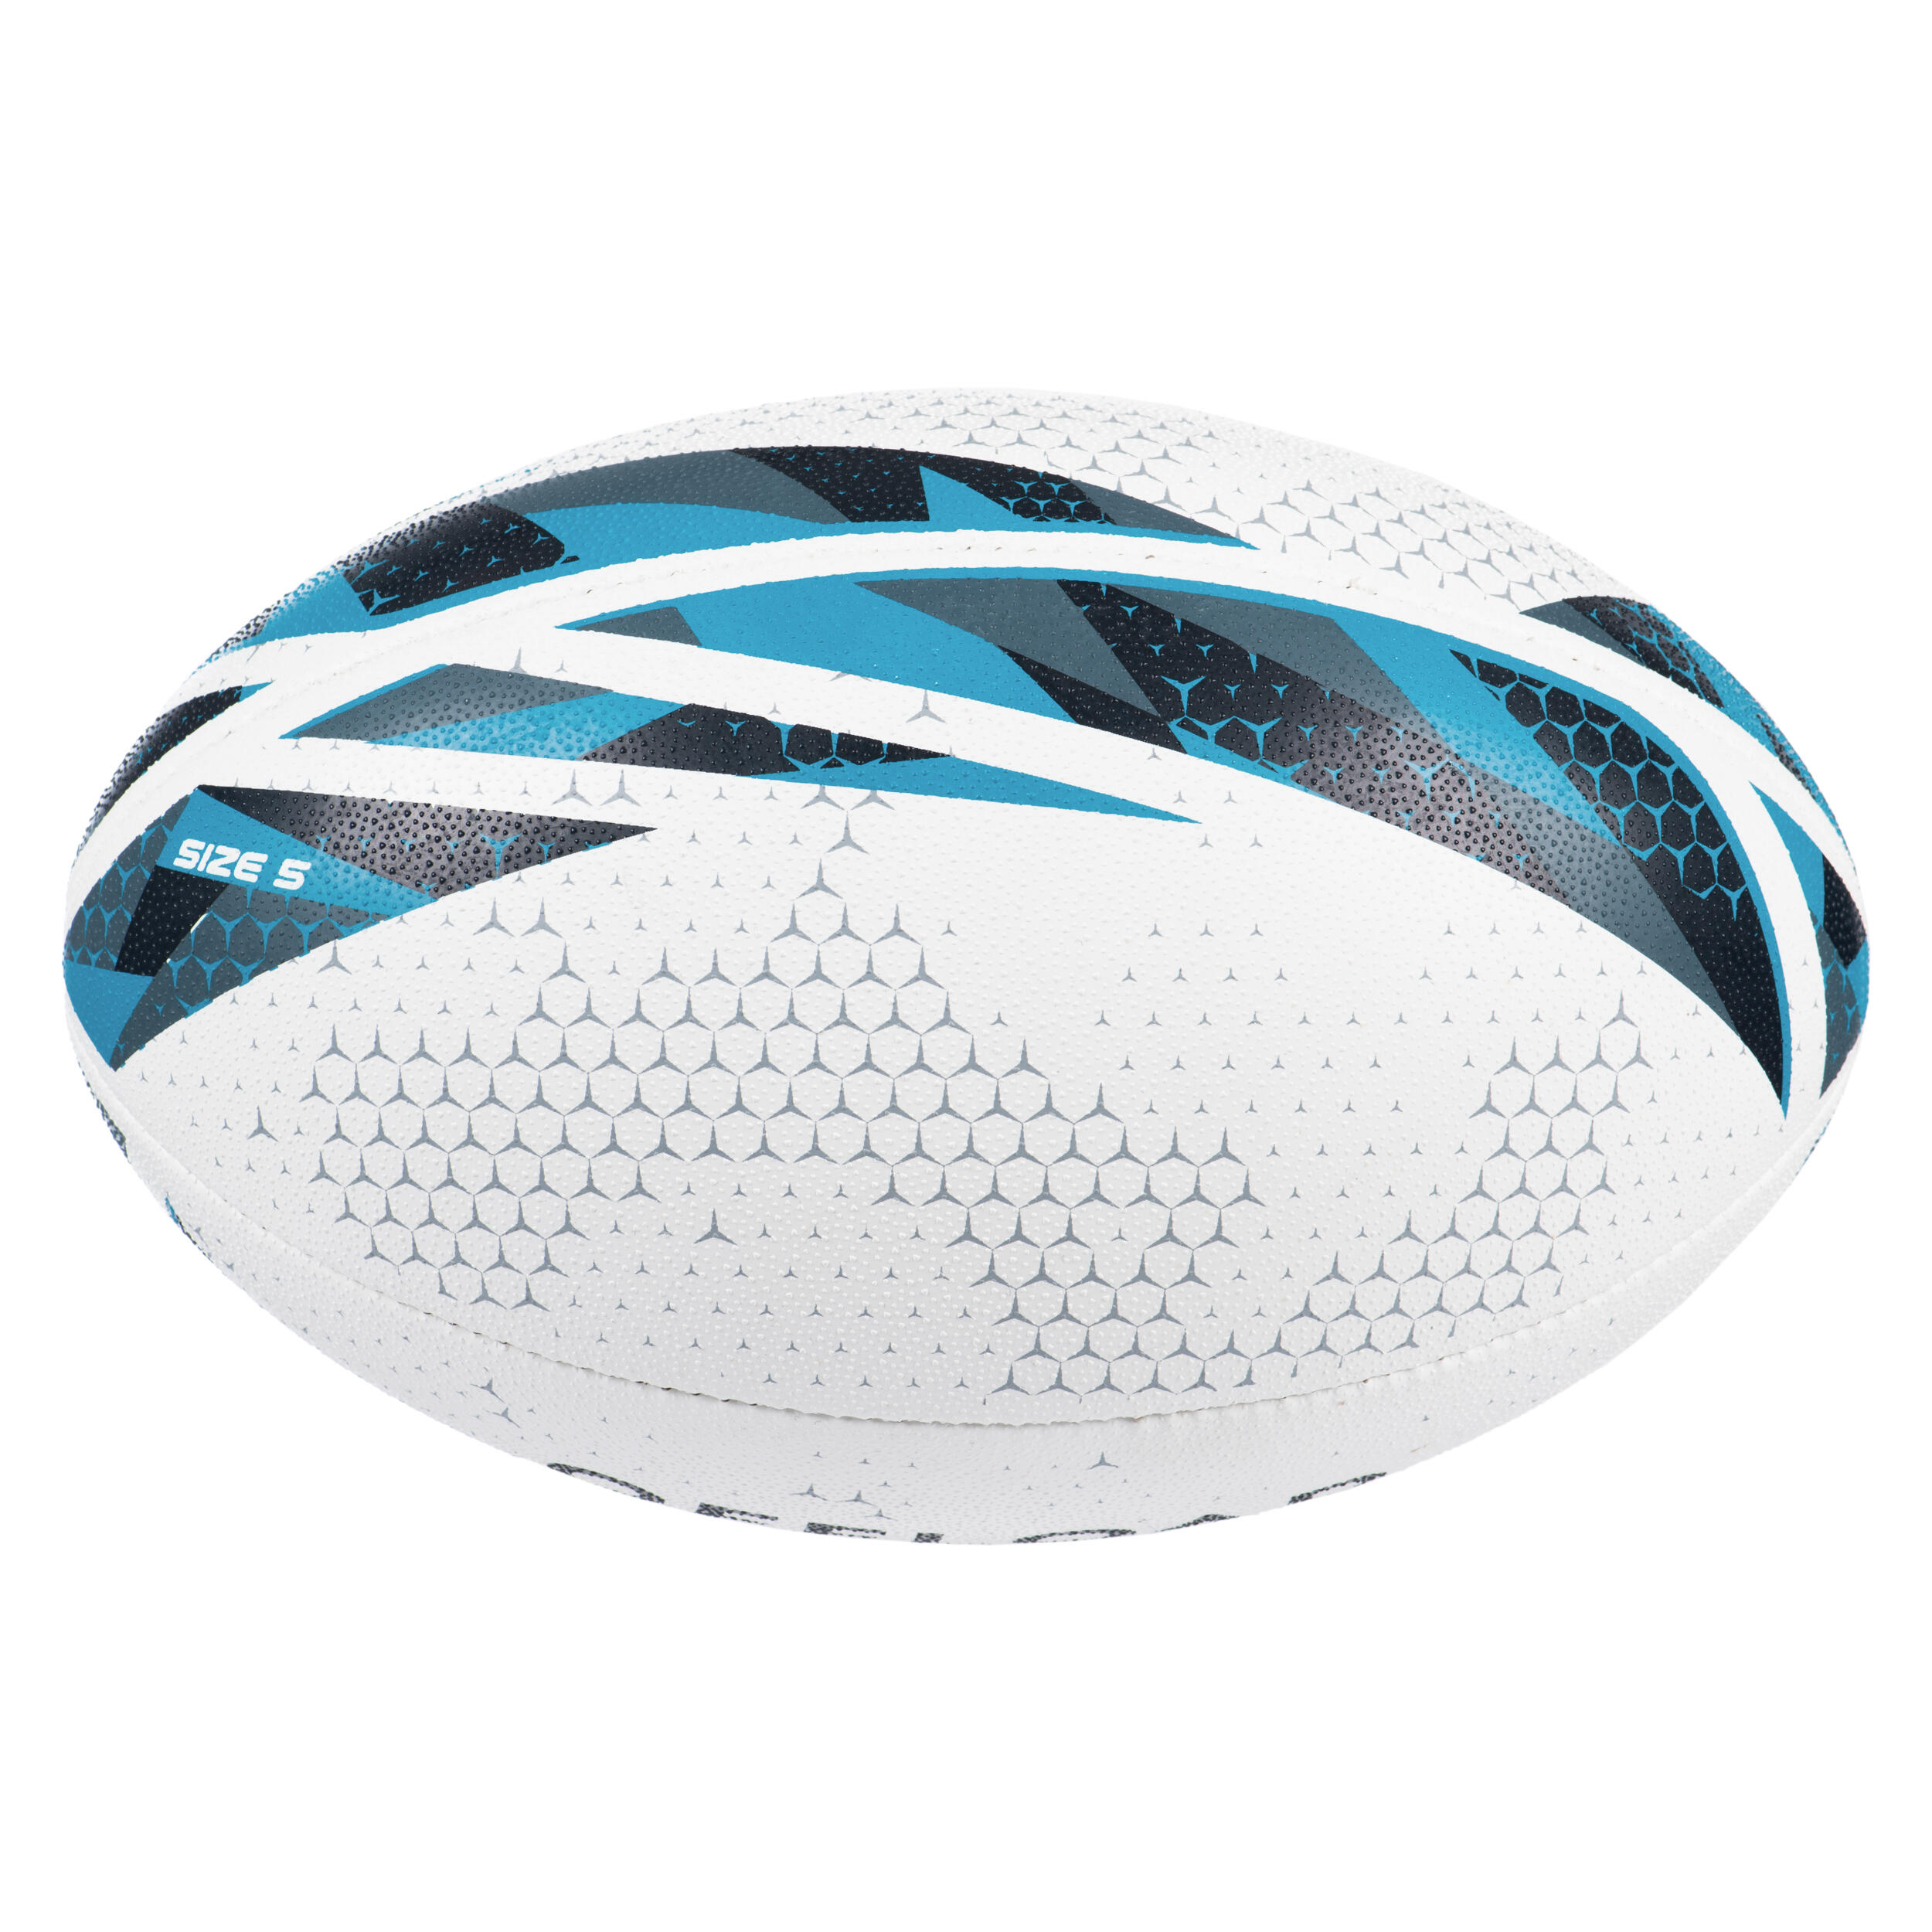 Size 5 Rugby Ball R500 Match - White 6/7